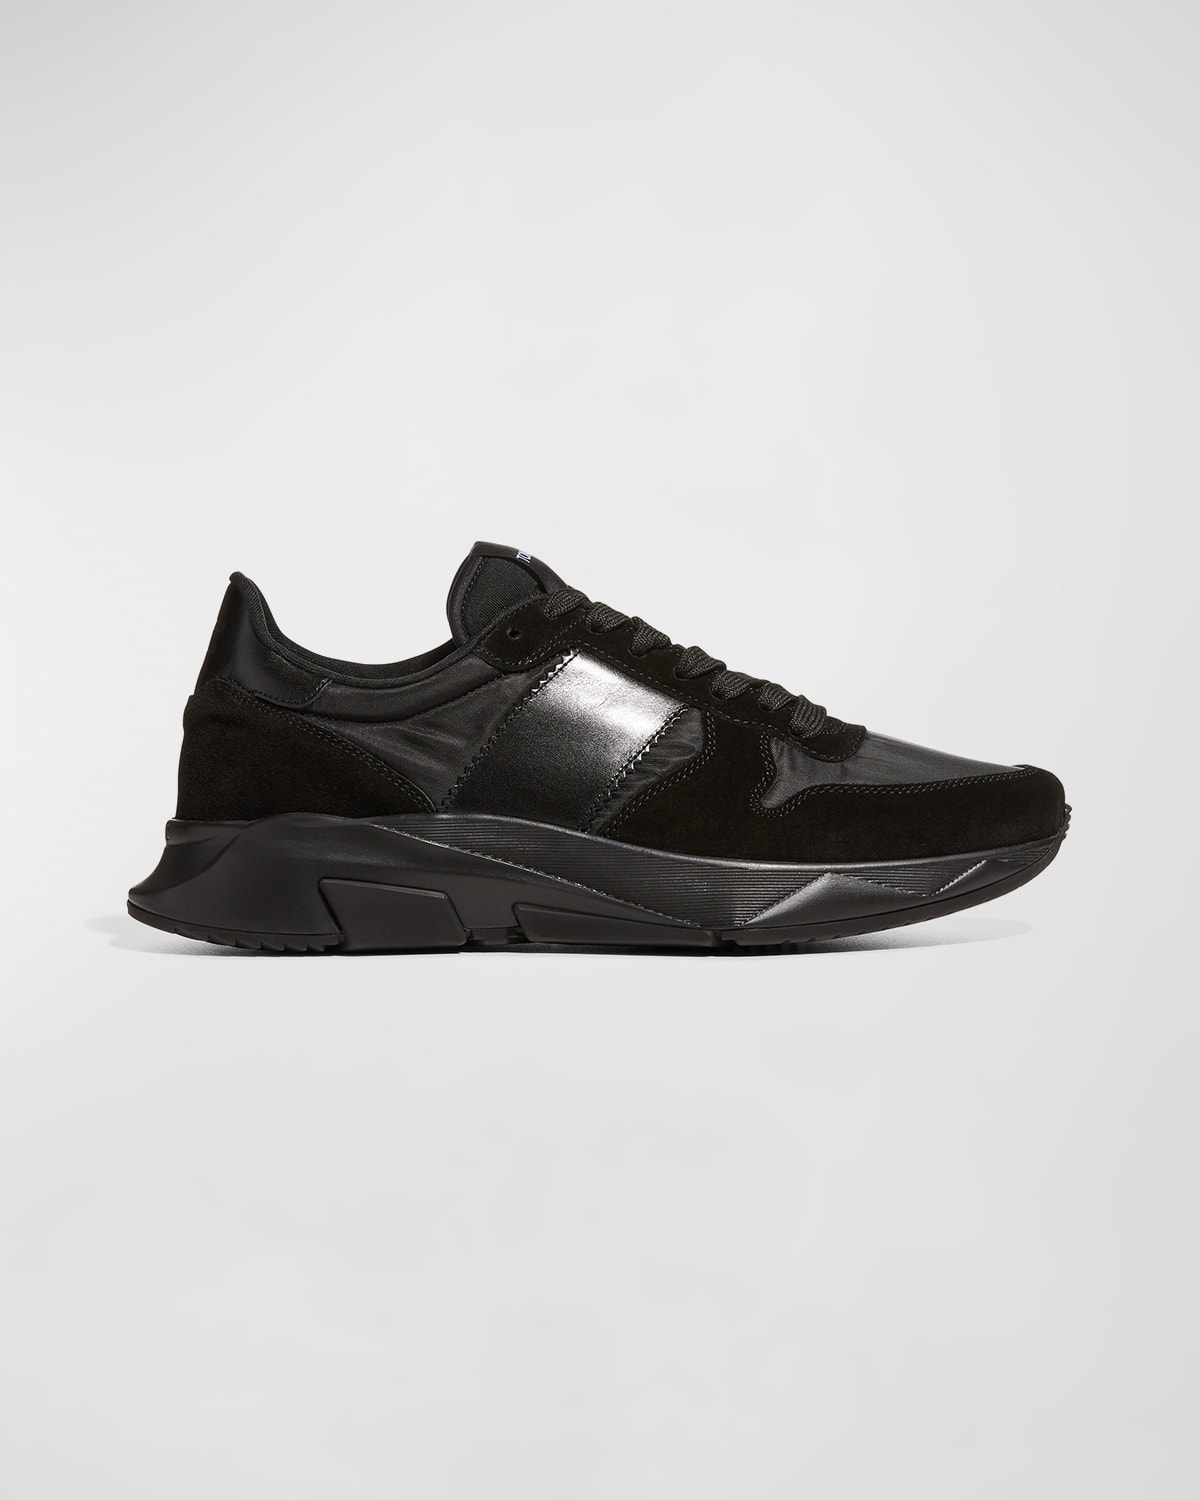 Blossom Hæl Faciliteter TOM FORD Men's Jagga Tonal Nylon & Suede Trainer Sneakers | Neiman Marcus